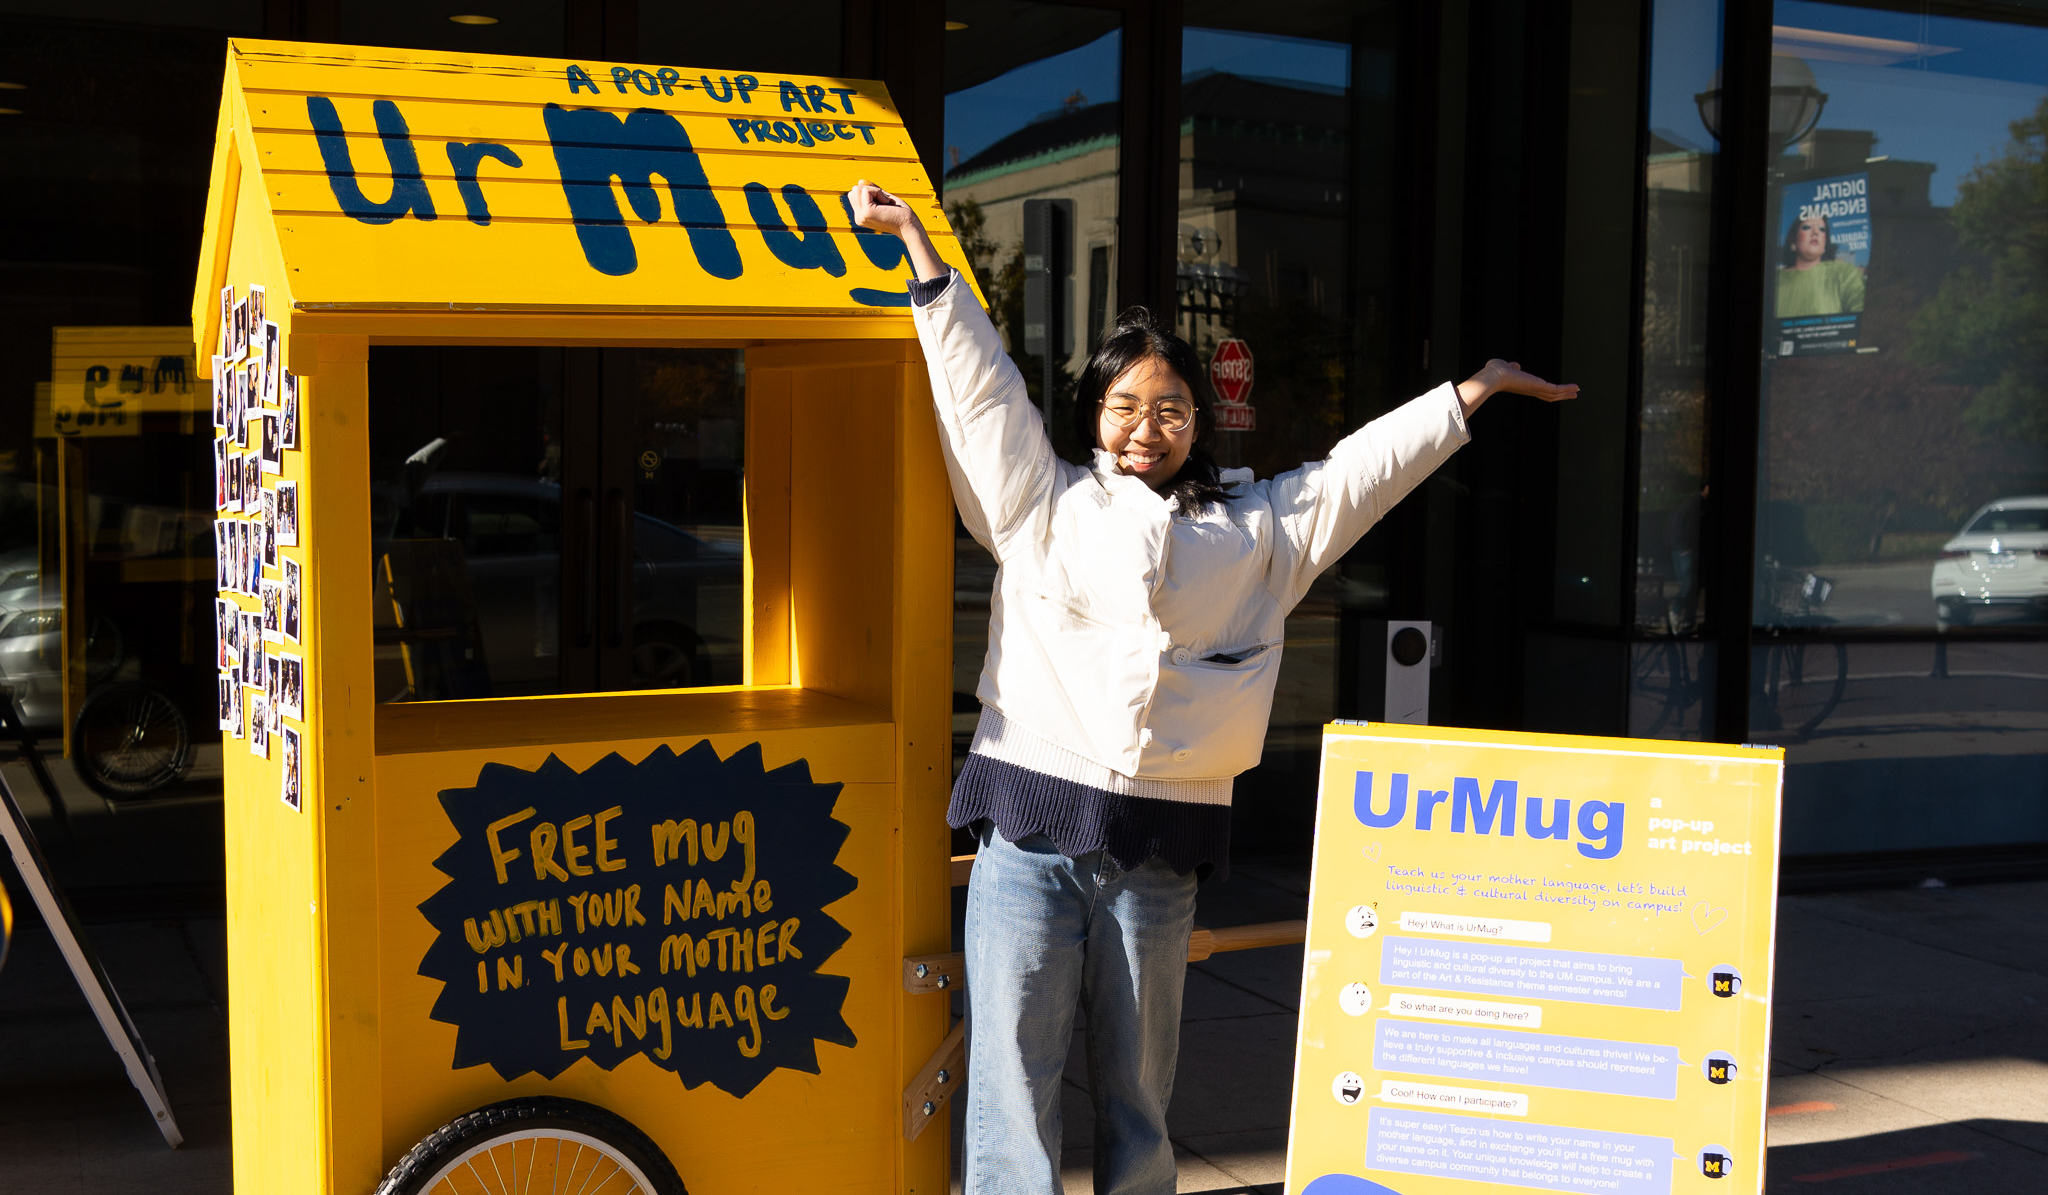 Yuchen Wu, wearing jeans and a white jacket, poses with her yellow "Ur Mug" cart and a sign describing her installation.